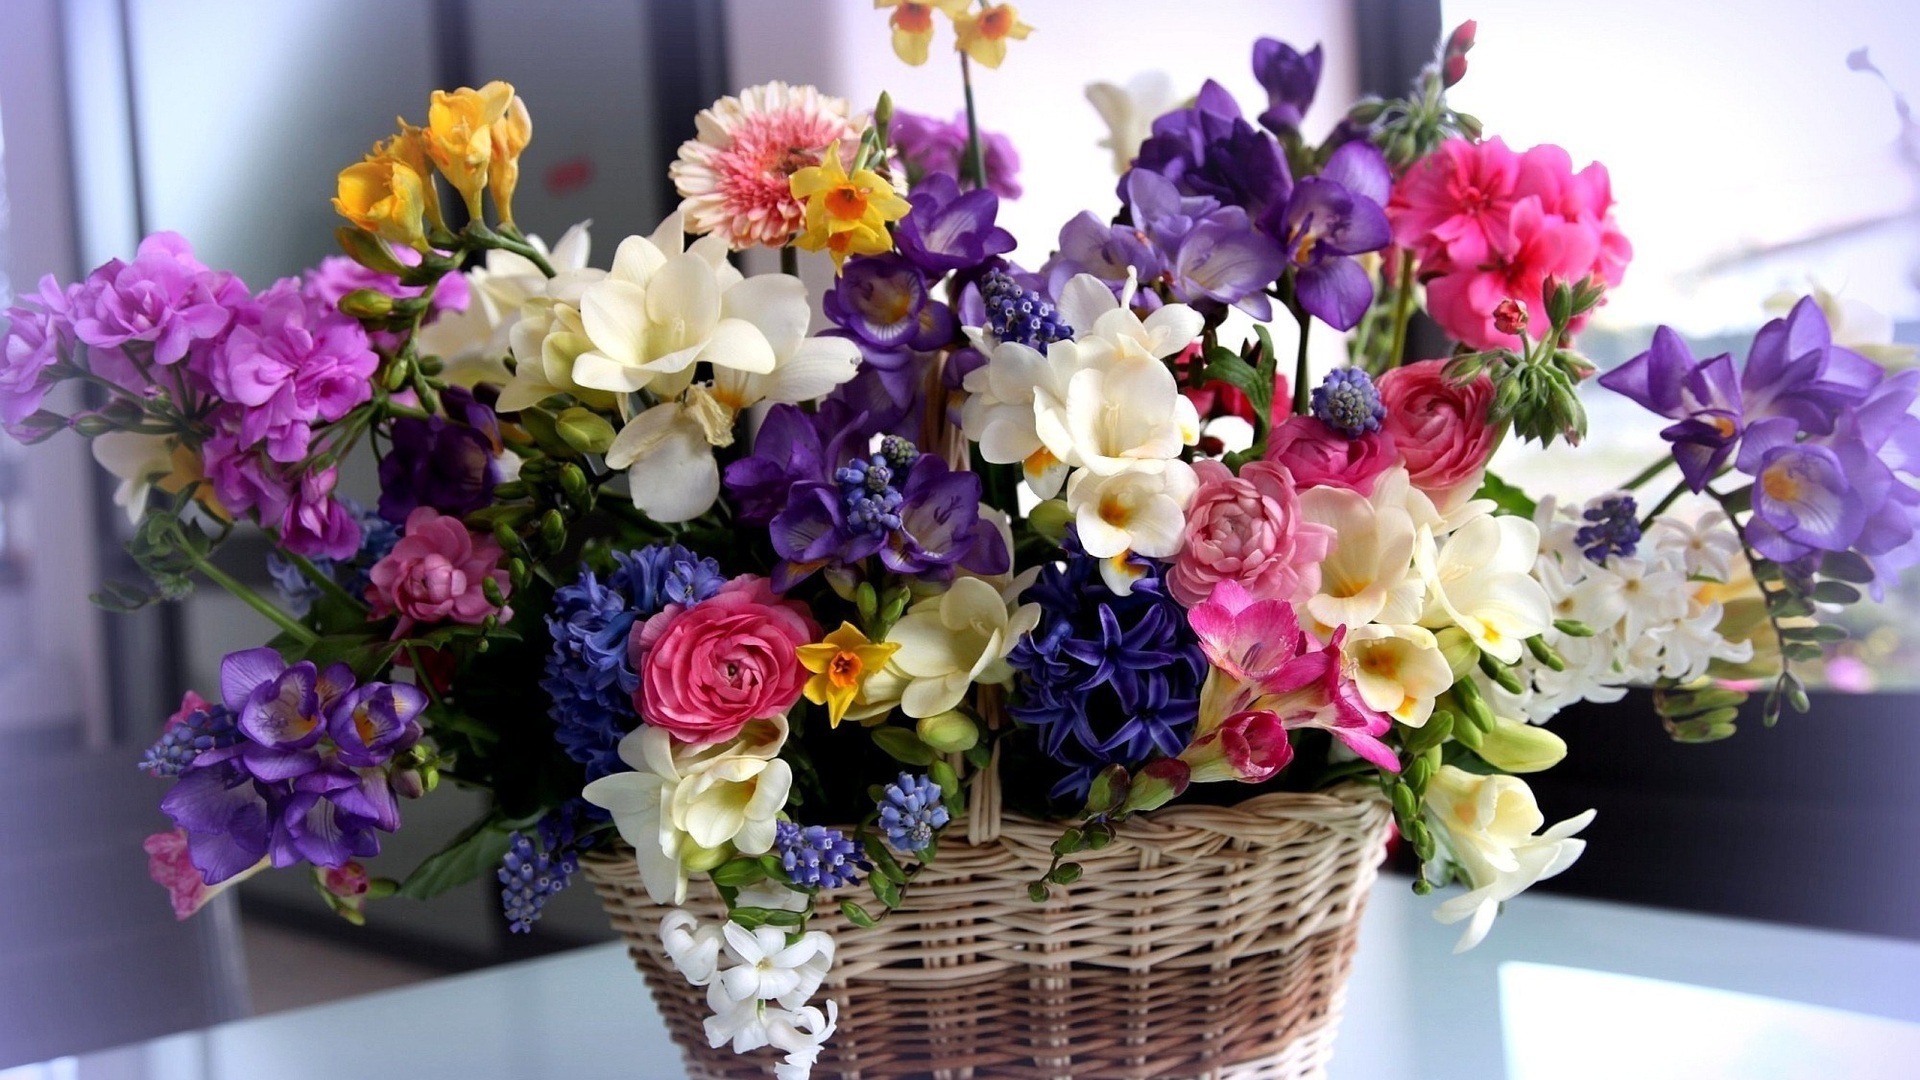 holidays_international_womens_day_beautiful_bouquet_in_a_basket_on_march_8_057122.jpg